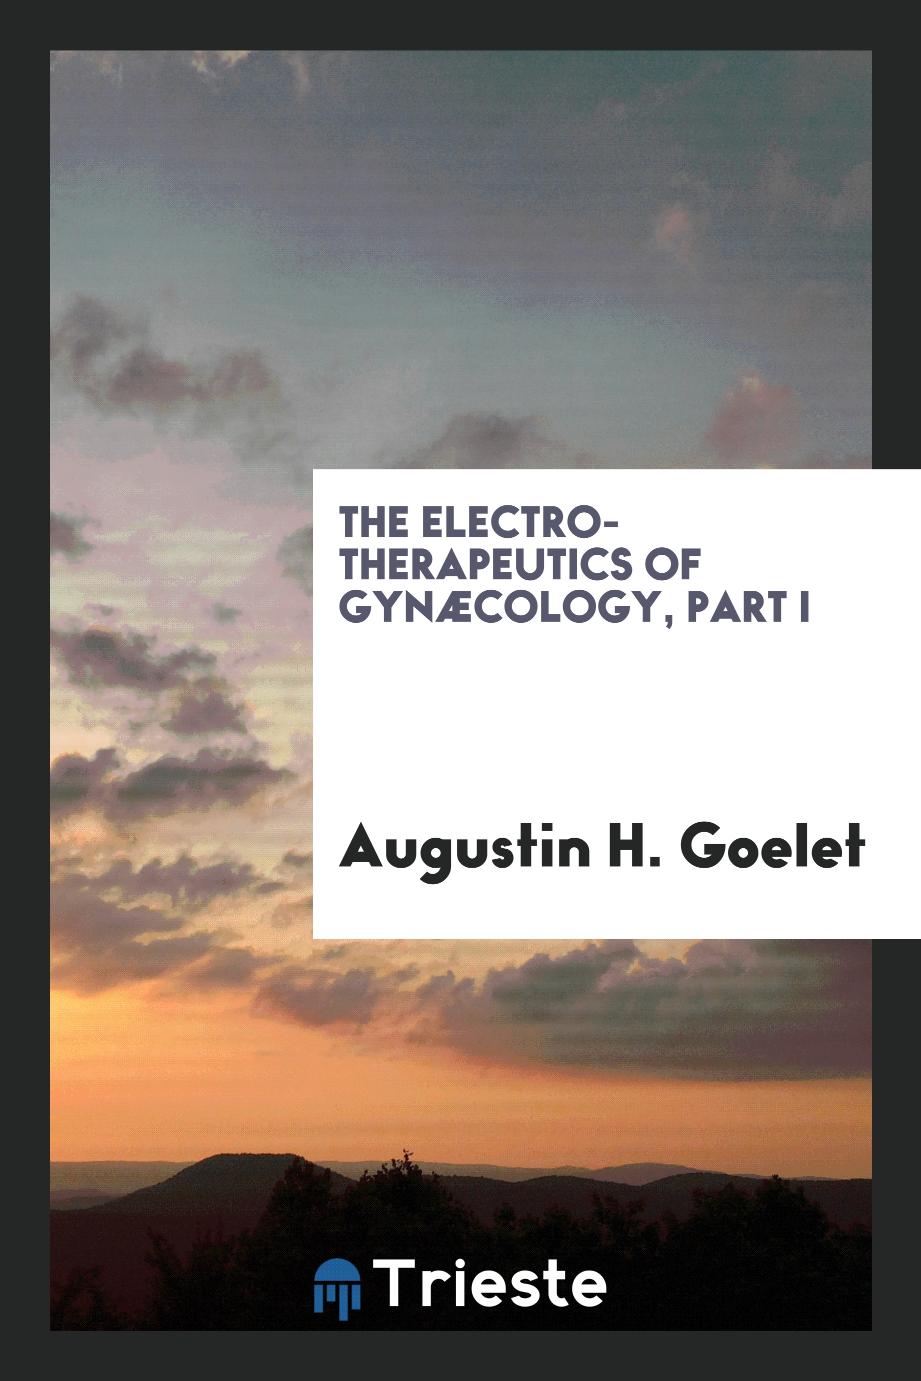 Augustin H. Goelet - The Electro-Therapeutics of Gynæcology, Part I